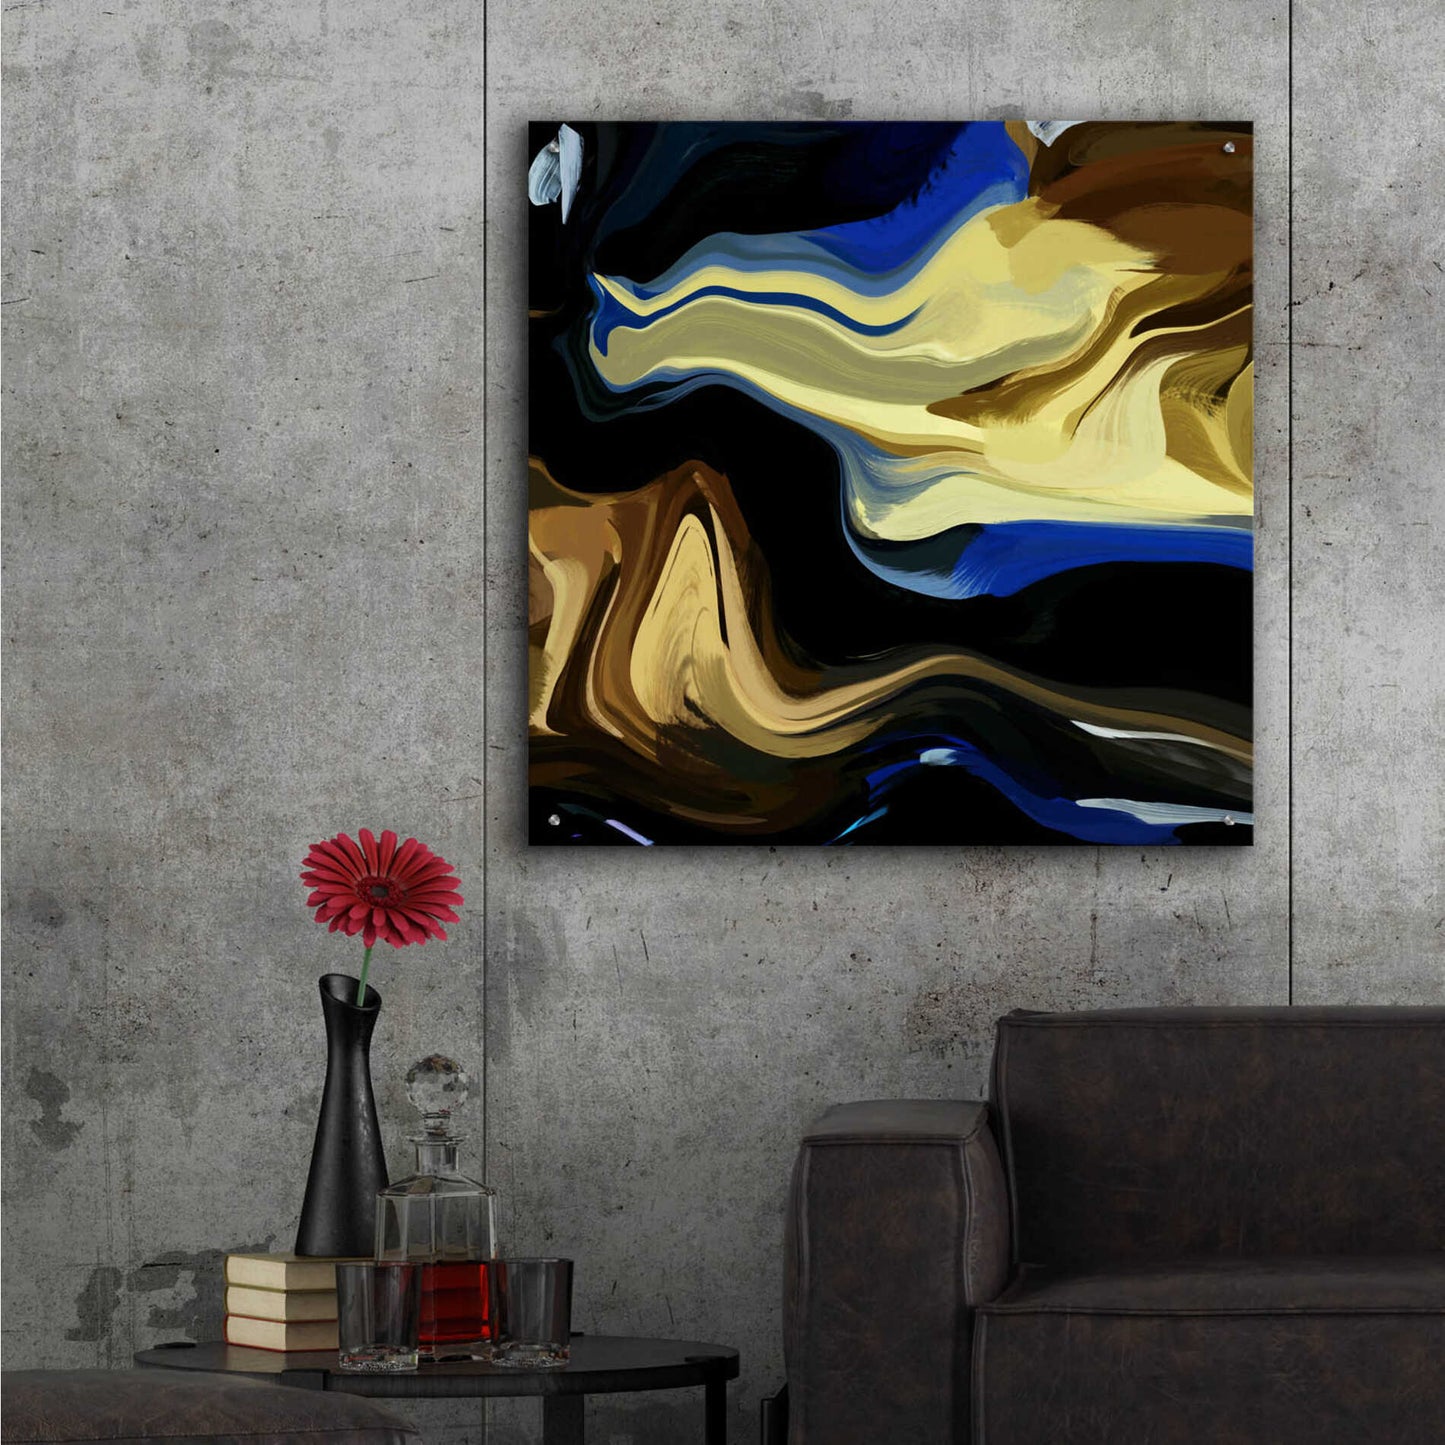 Epic Art 'Inverted Abstract Colorful Flows 16' by Irena Orlov Acrylic Glass Wall Art,36x36